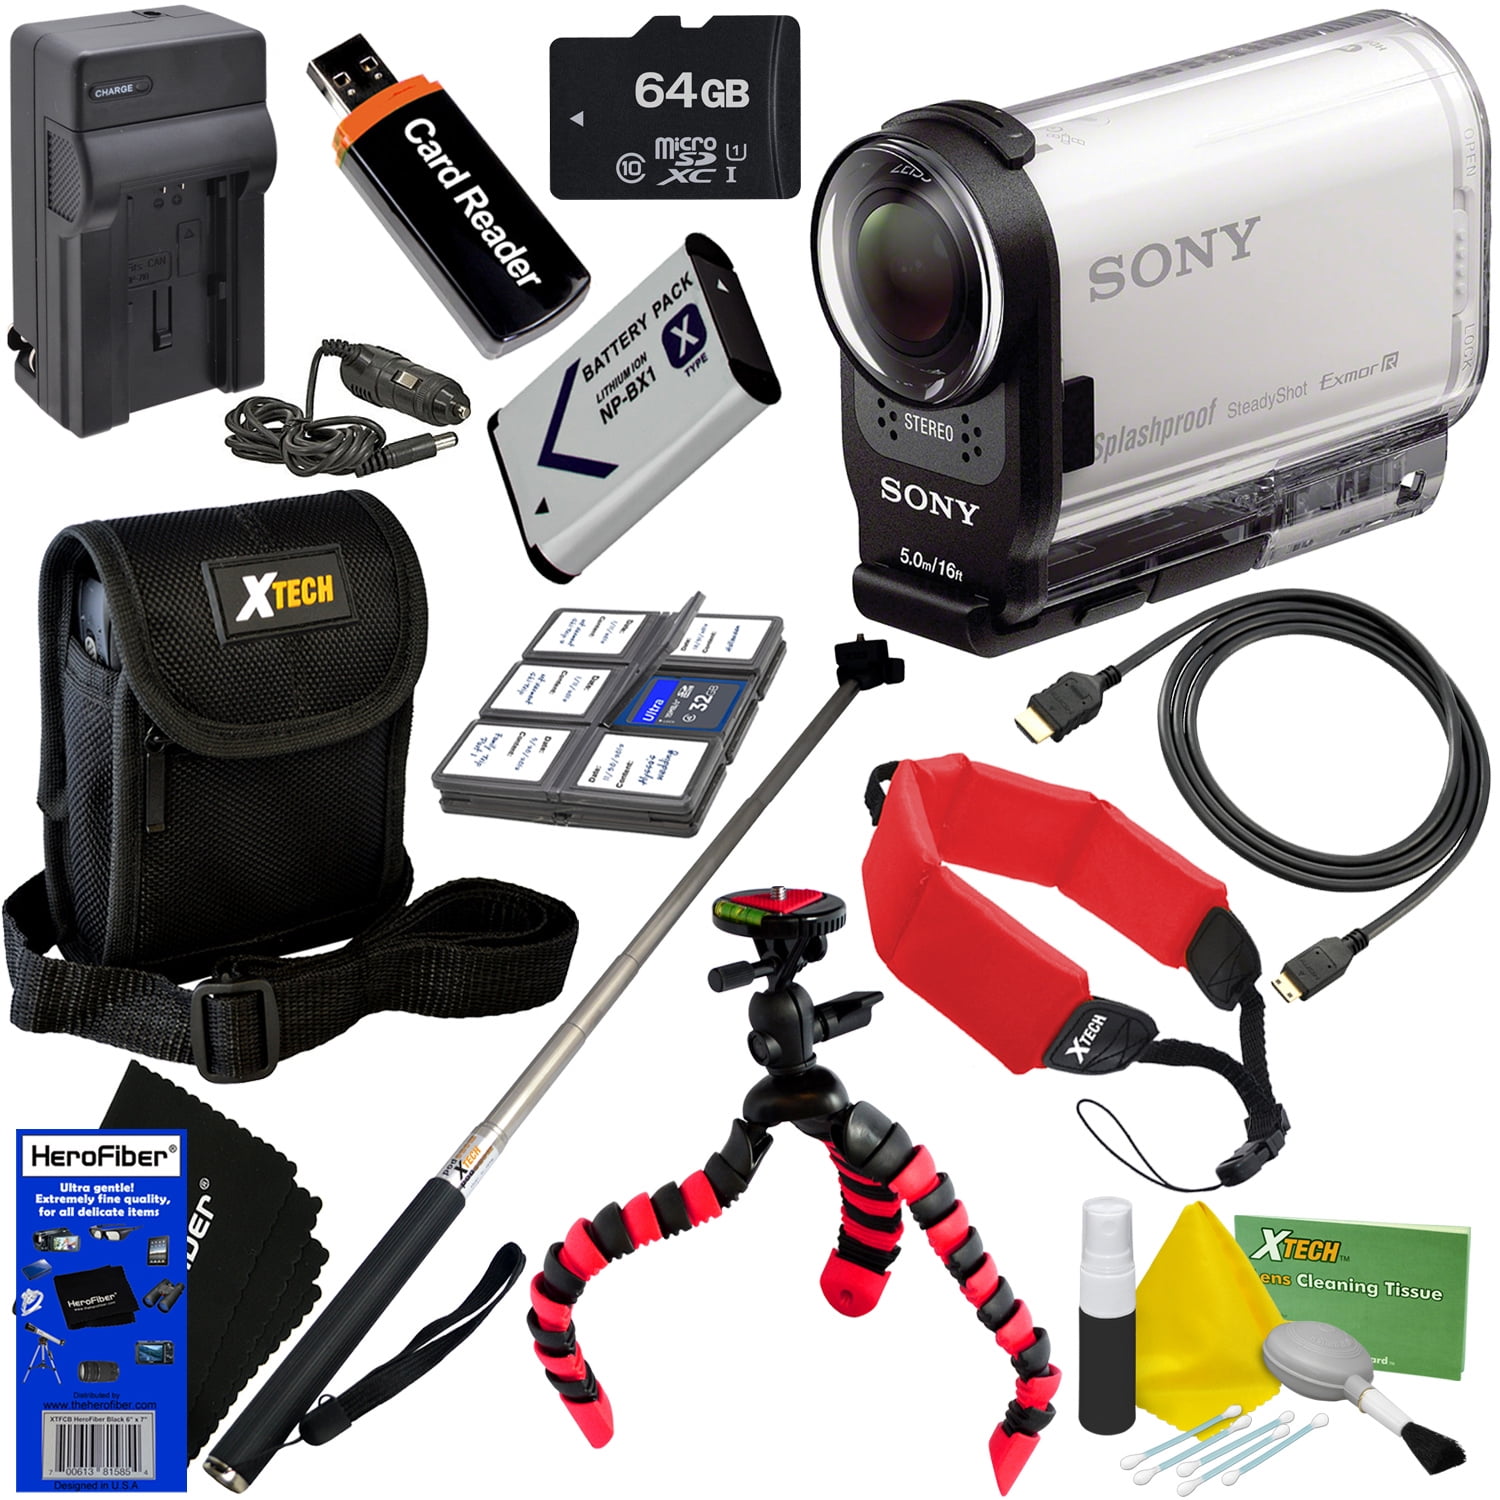 Sony HDR-AS200V Full HD Action Cam with Wi-Fi, GPS & Ultra-Wide 170° + NP-BX1 & AC/DC Charger + 10pc Deluxe Kit w/ HeroFiber Cloth - Walmart.com